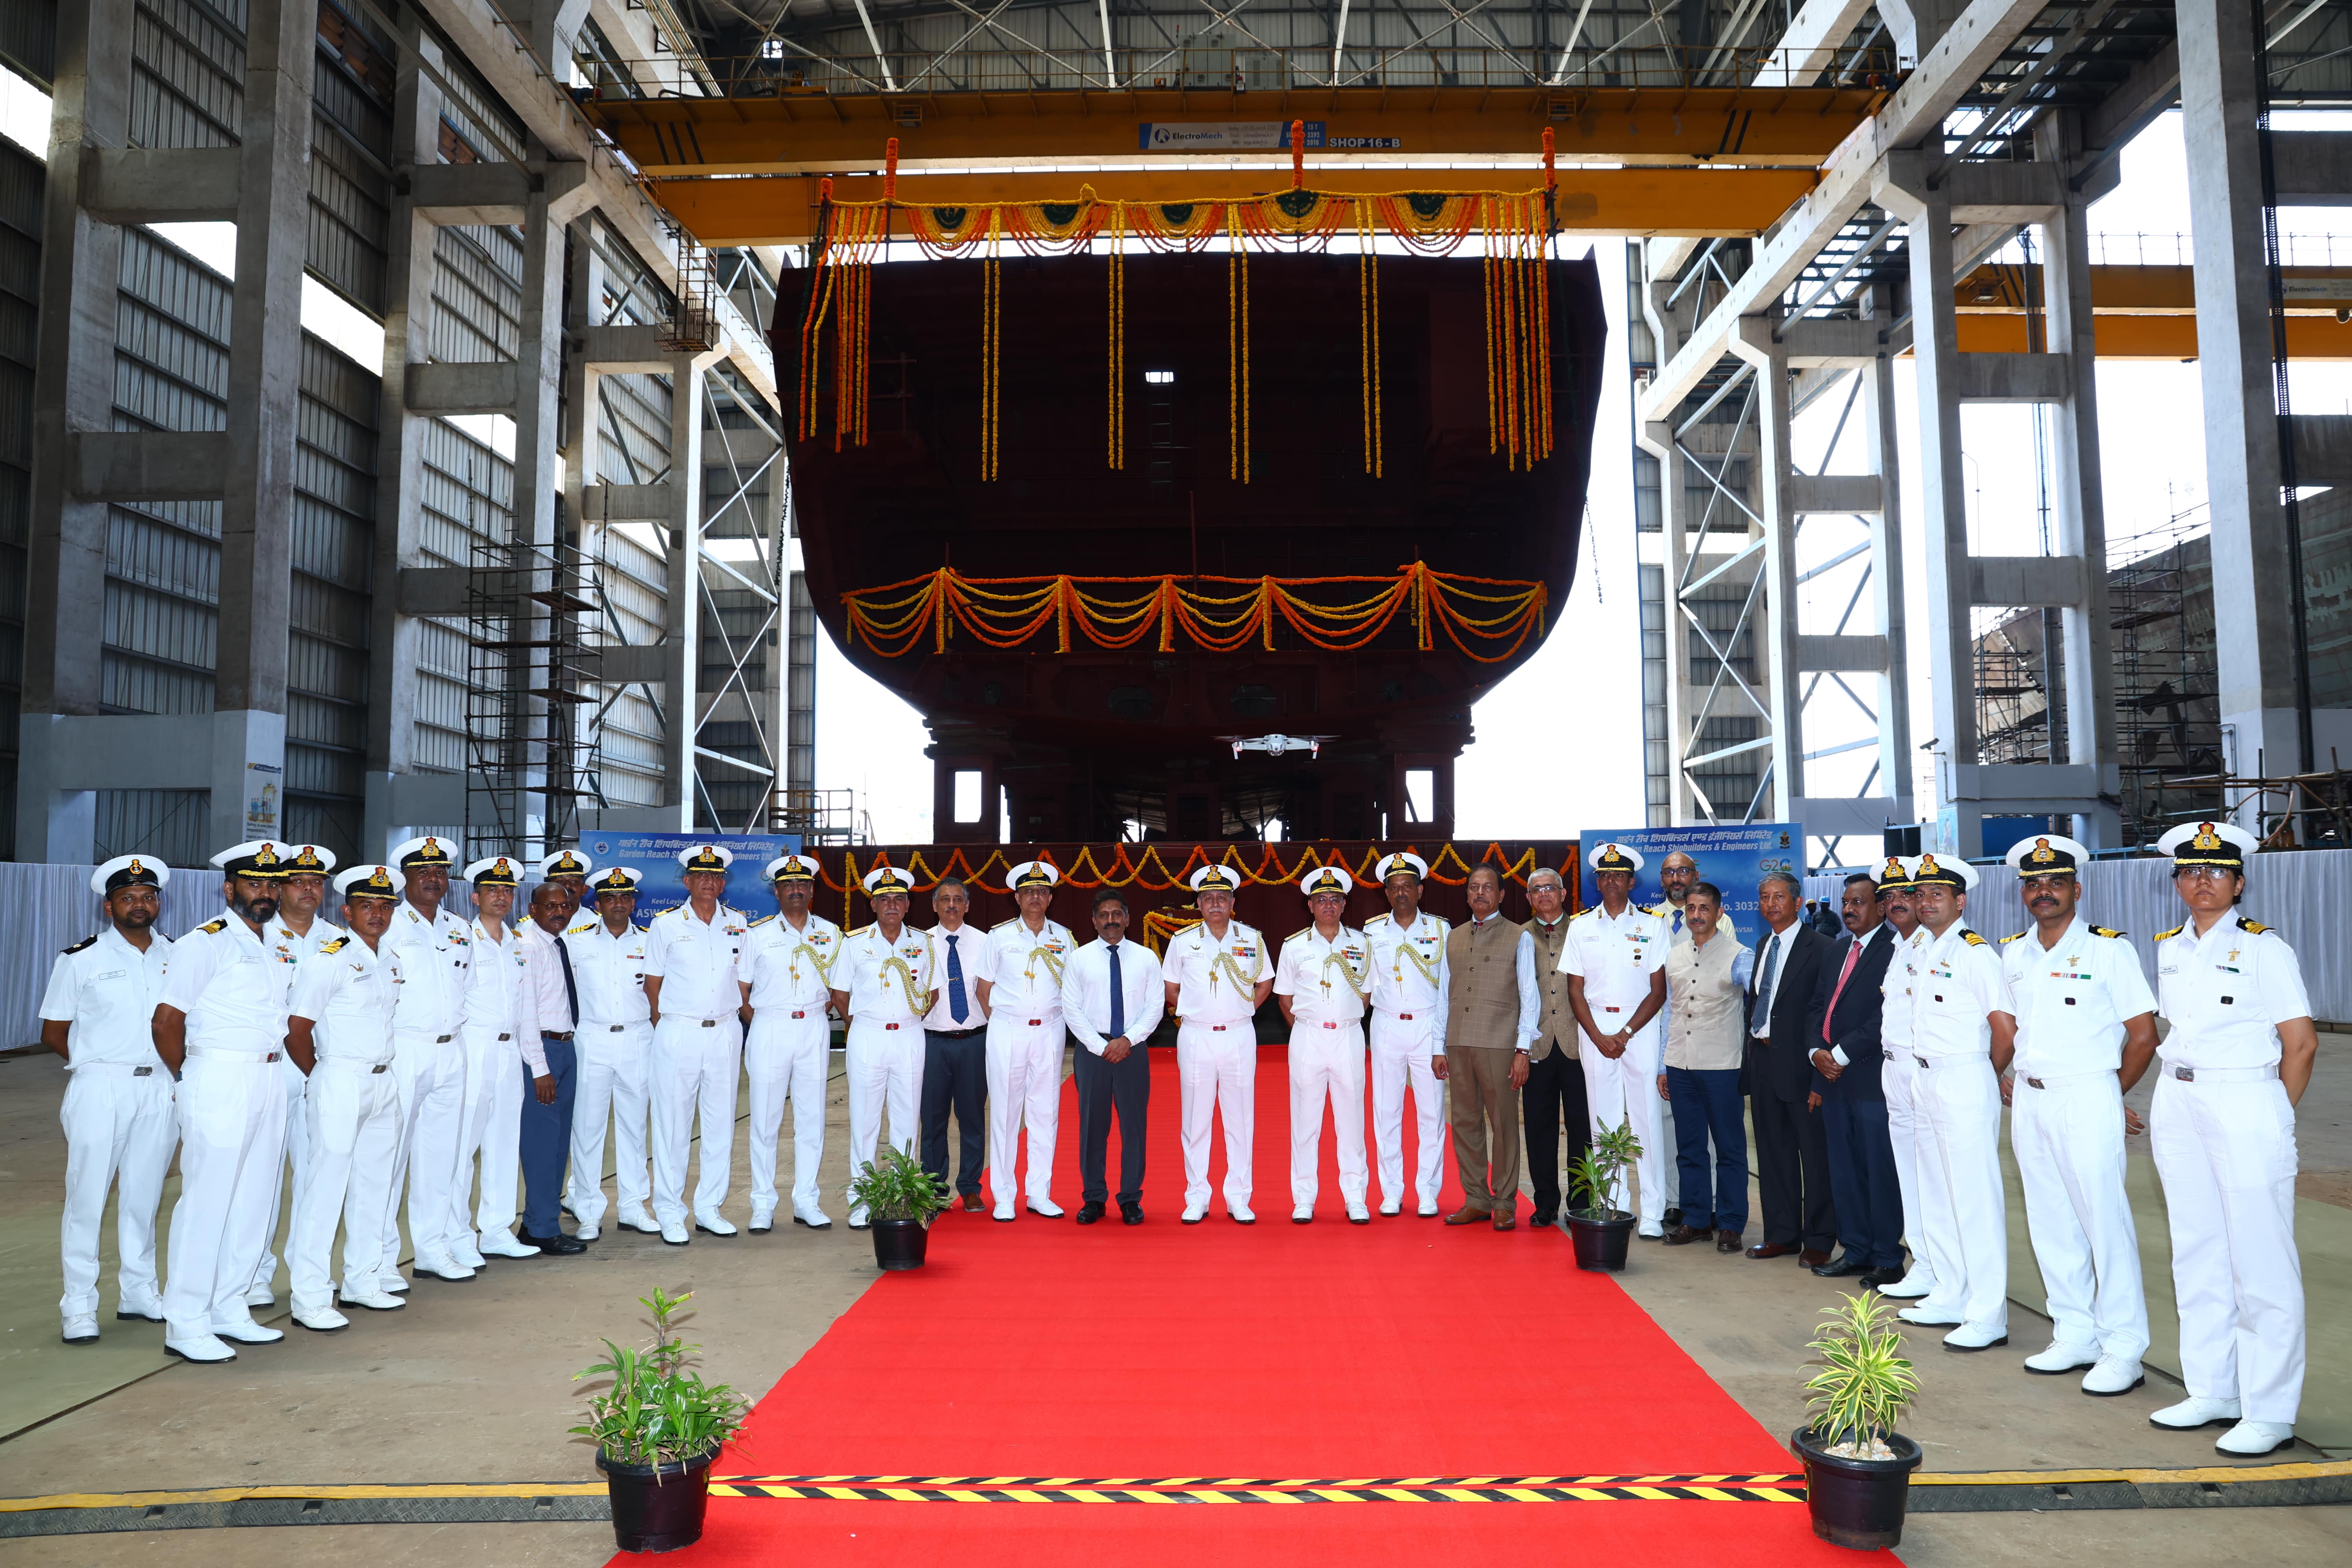 Launch of 4th Survey Vessel (Large) - Yard 3028, 3rd ASWSWC - Yard 3030 & Keel Laying of 7th ASWSWC - Yard 3032 on 13 Jun 23 - Thumbnail